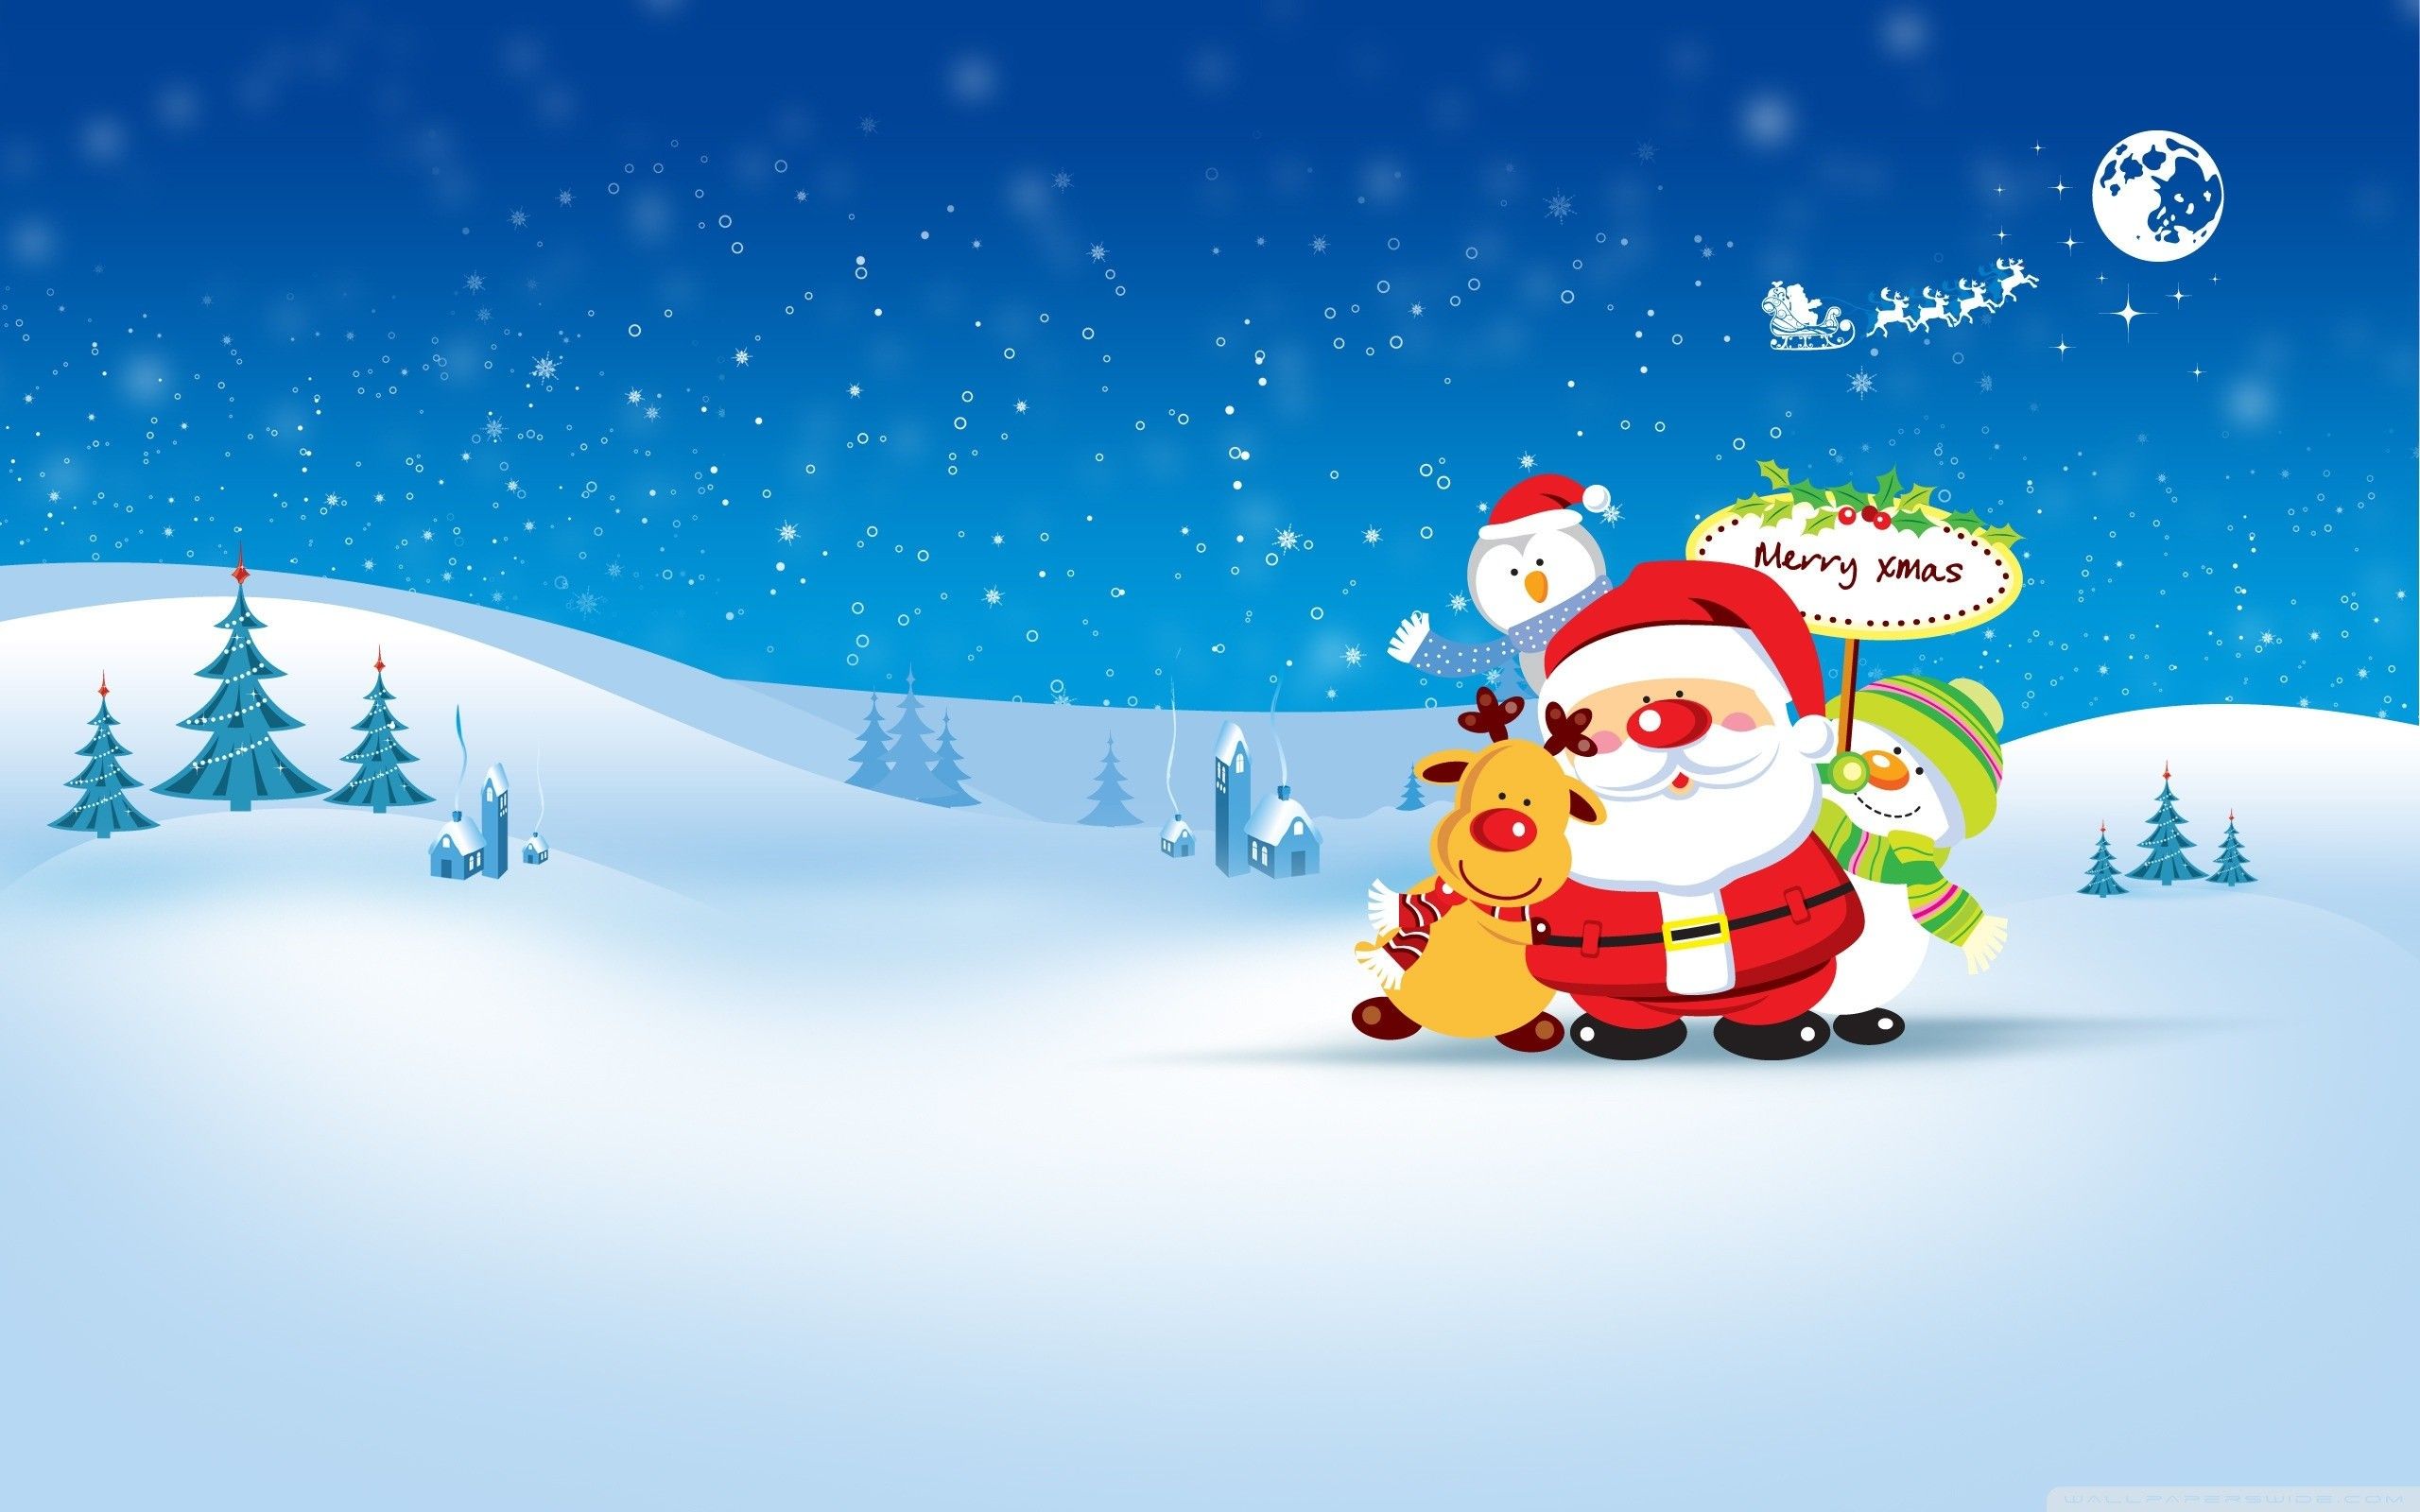 Animated Christmas Desktop Wallpaper (30 + Background Pictures)